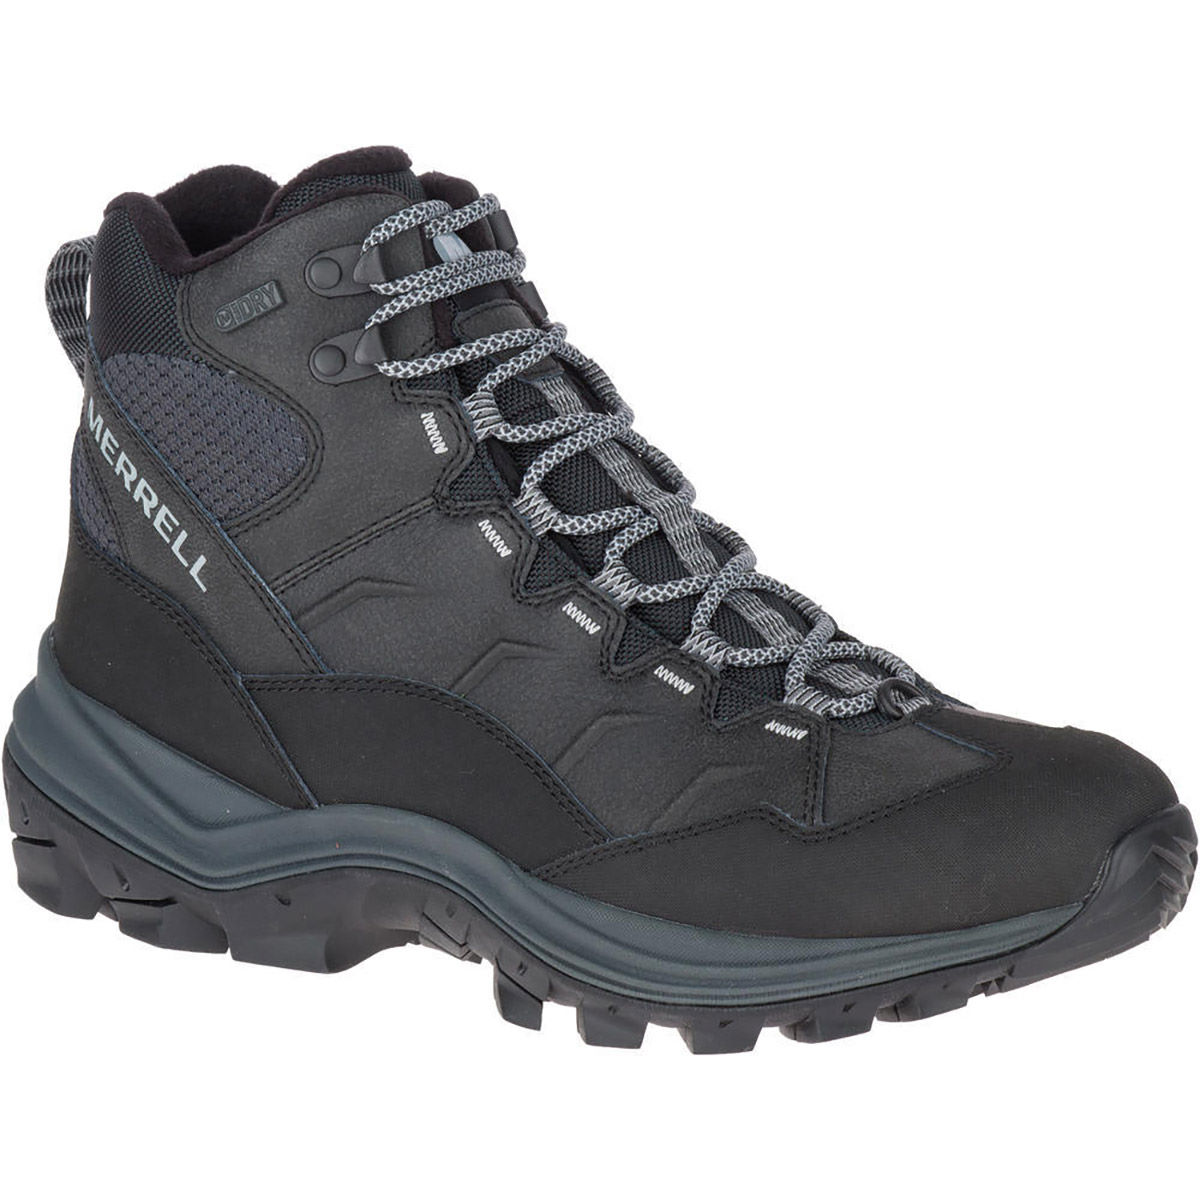 Botines impermeables Merrell Thermo Chill - Botas y botines